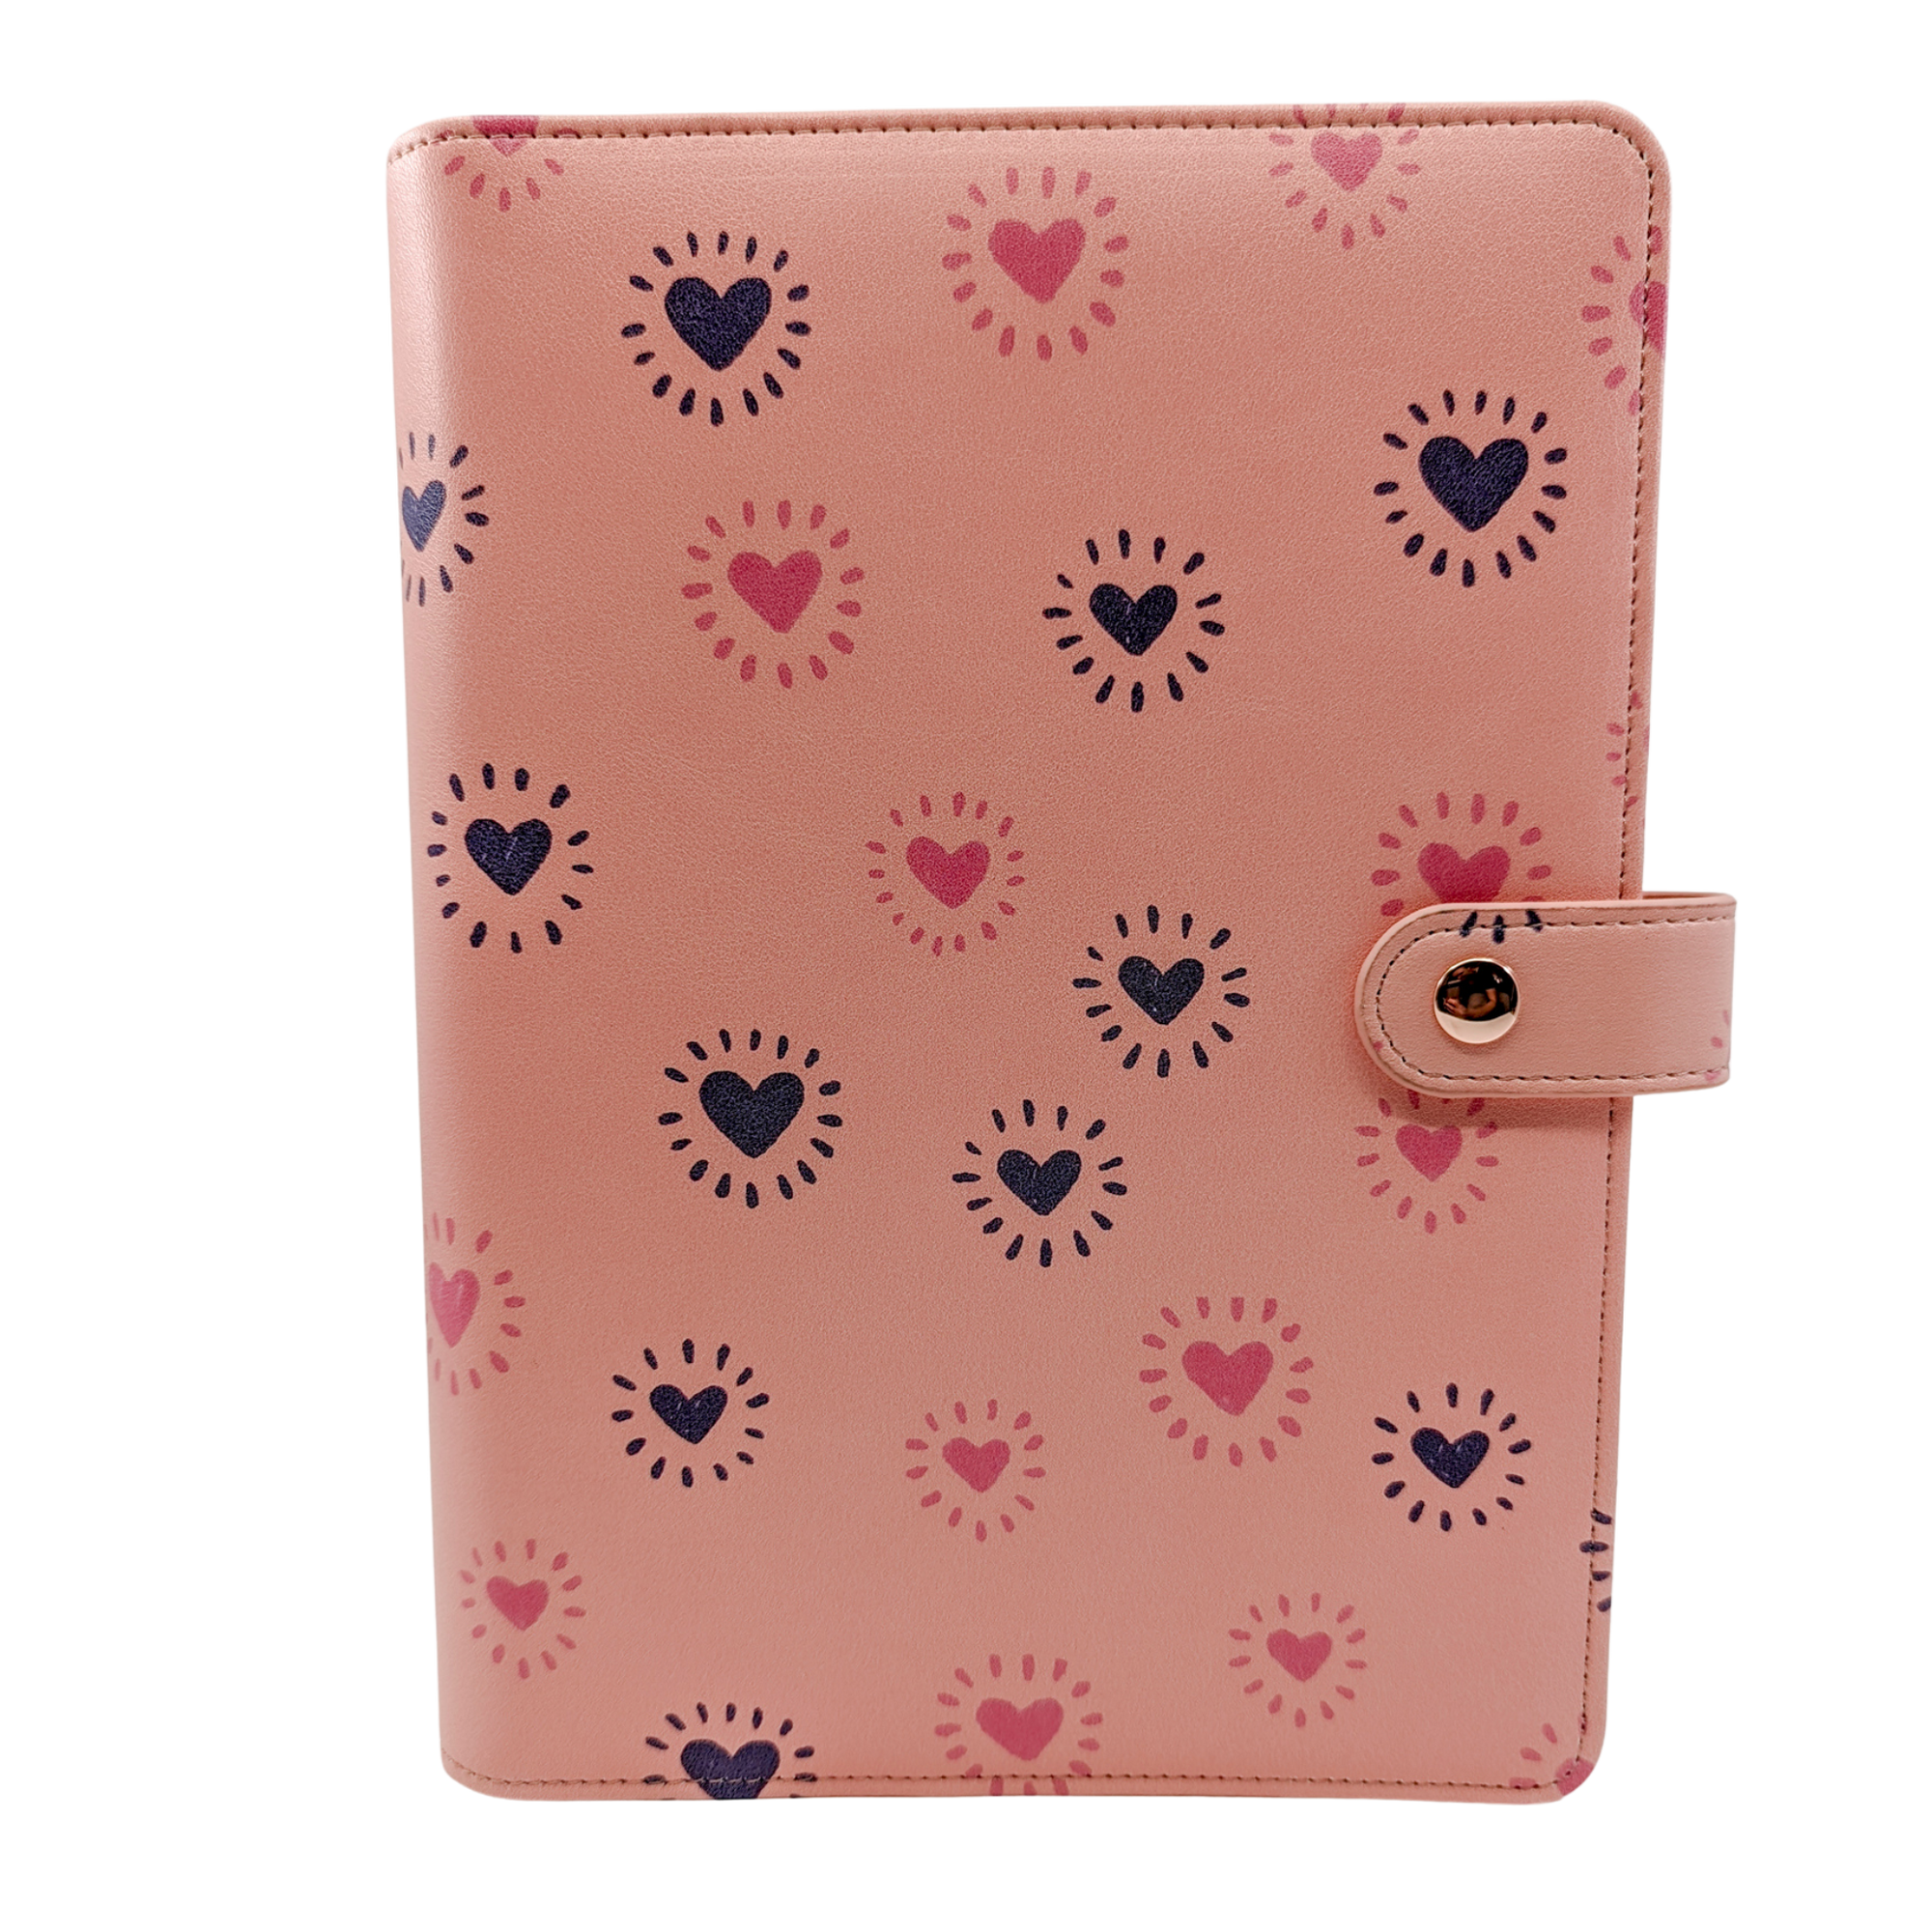 Steal My Heart A5 Planner